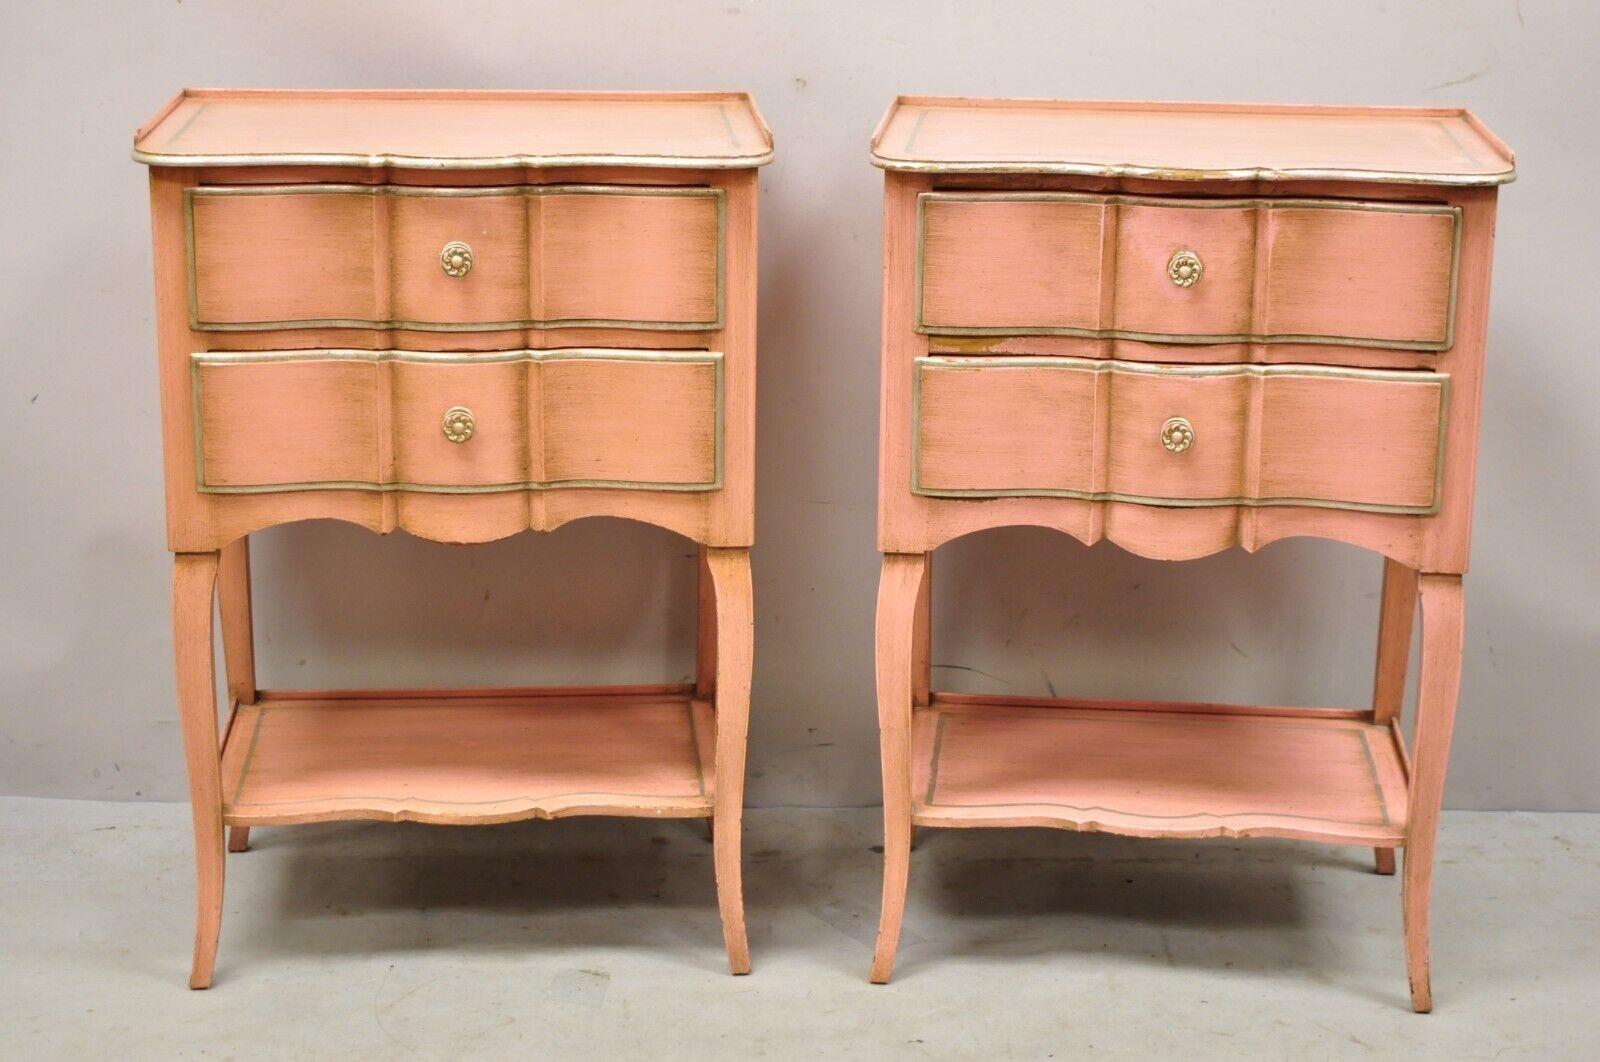 Pair of Vintage John Widdicomb Bubblegum Pink French Hollywood Regency Style Nightstands. Item features bubblegum pink custom vintage finish, silver painted accents, serpentine front, lower shelf, original label, 2 dovetailed drawers, very nice